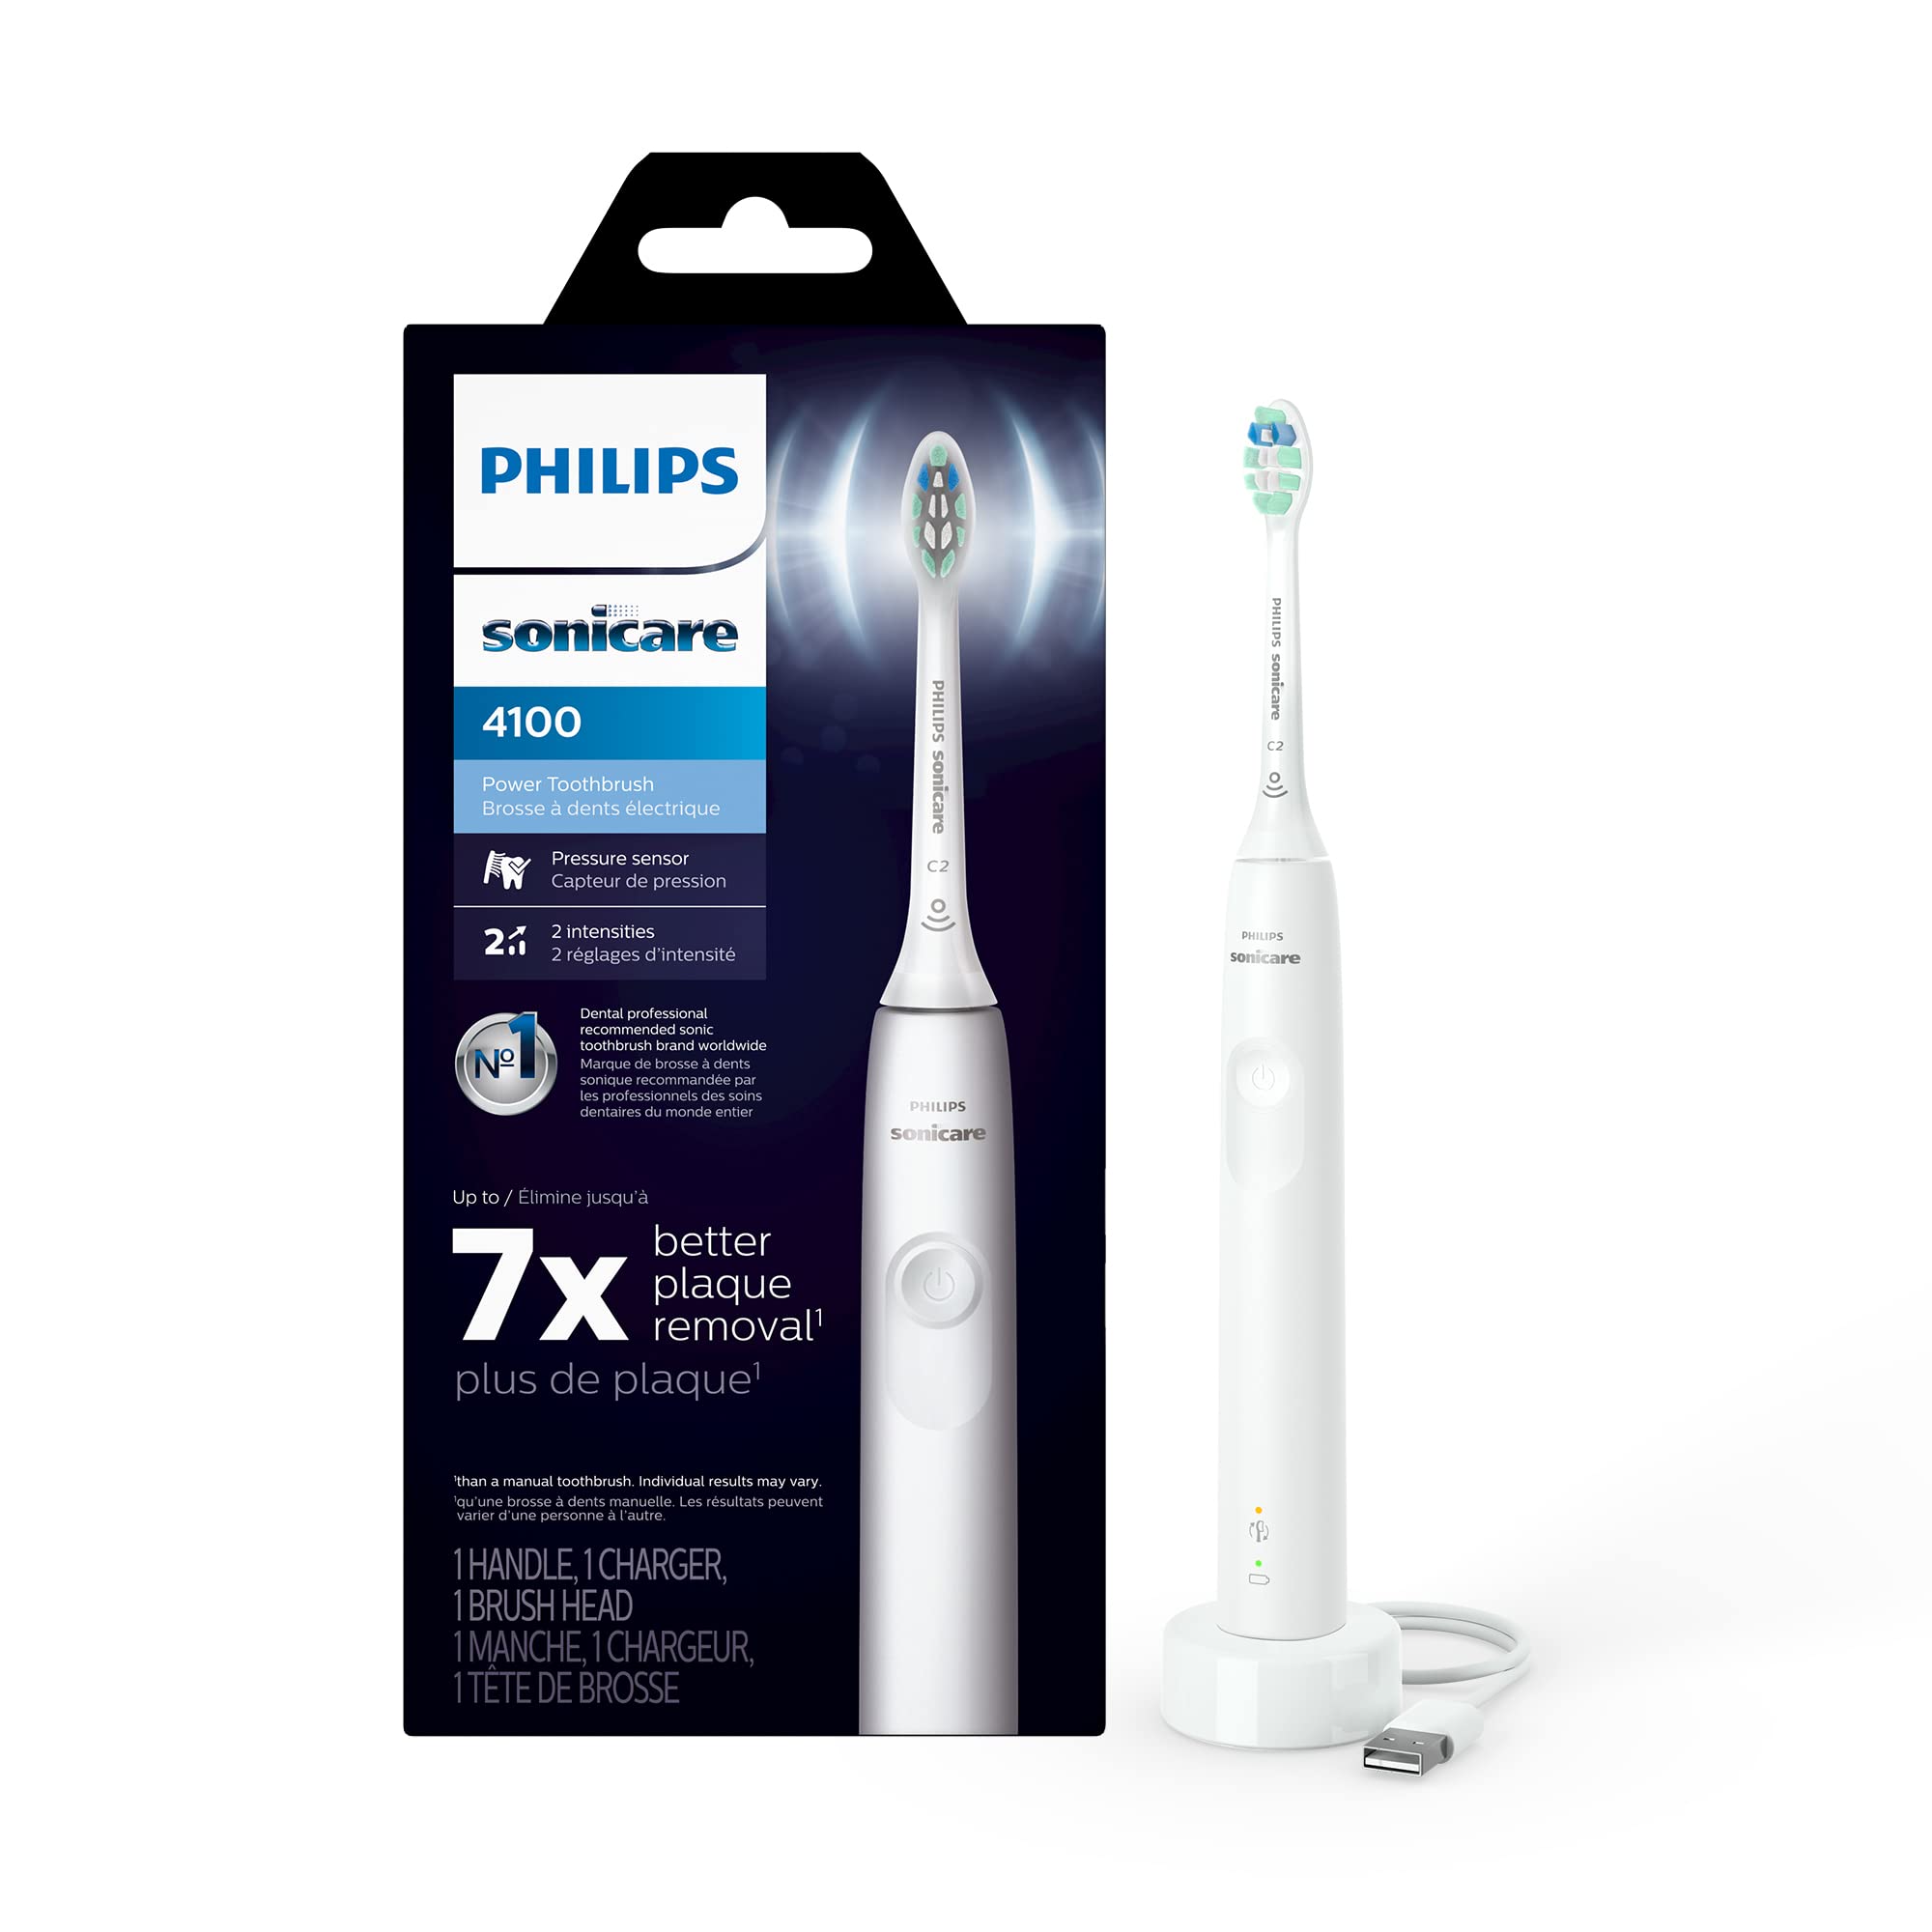 PHILIPS Sonicare 4100 Power Toothbrush, Rechargeable Electric Toothbrush with Pressure Sensor, Amazon.com $29.96